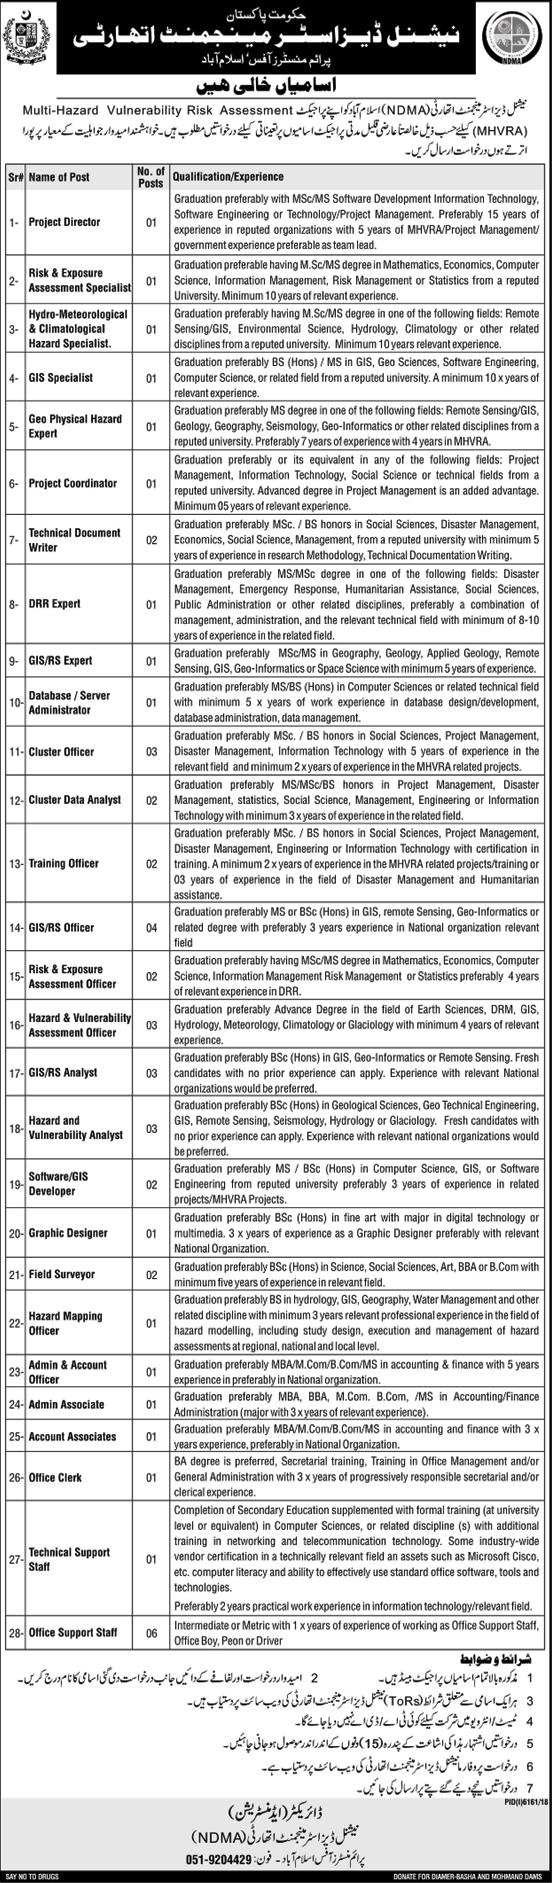 National Disaster Management Authority jobs 2019